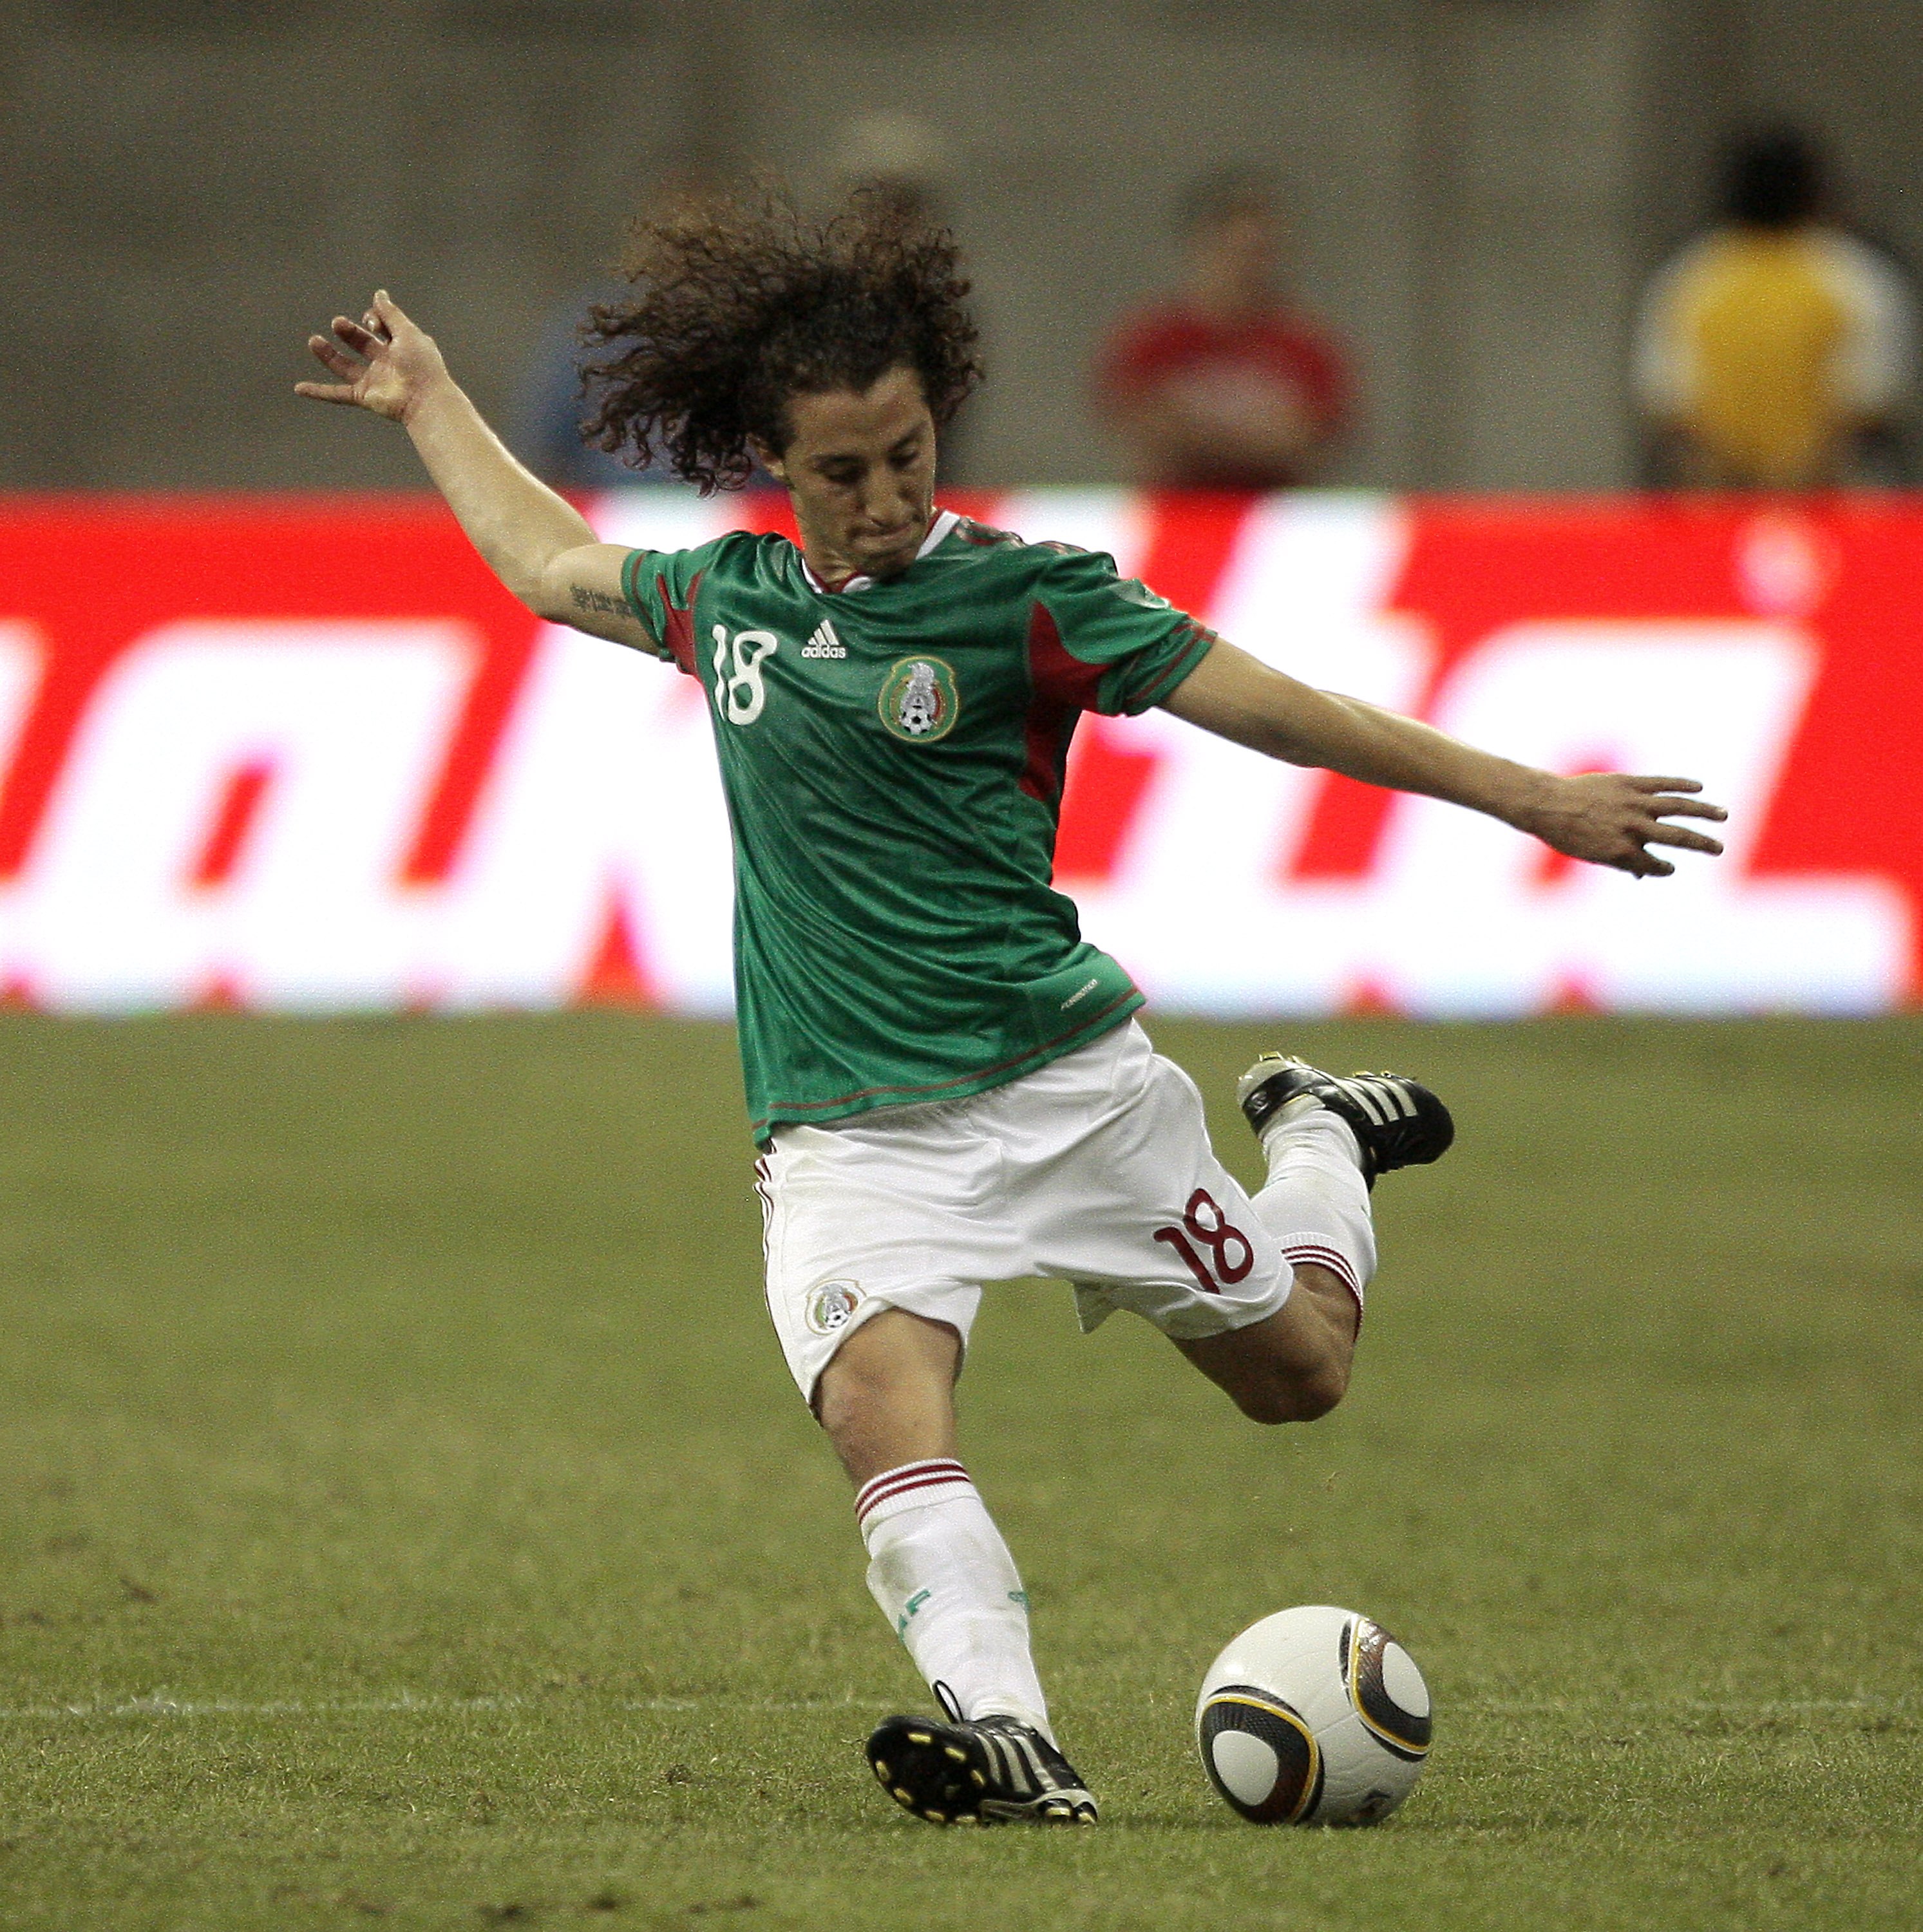 HOUSTON - MAY 13:  Andres Guardado #18 of Mexico kicks the ball against Angola at Reliant Stadium on May 13, 2010 in Houston, Texas.  (Photo by Bob Levey/Getty Images)